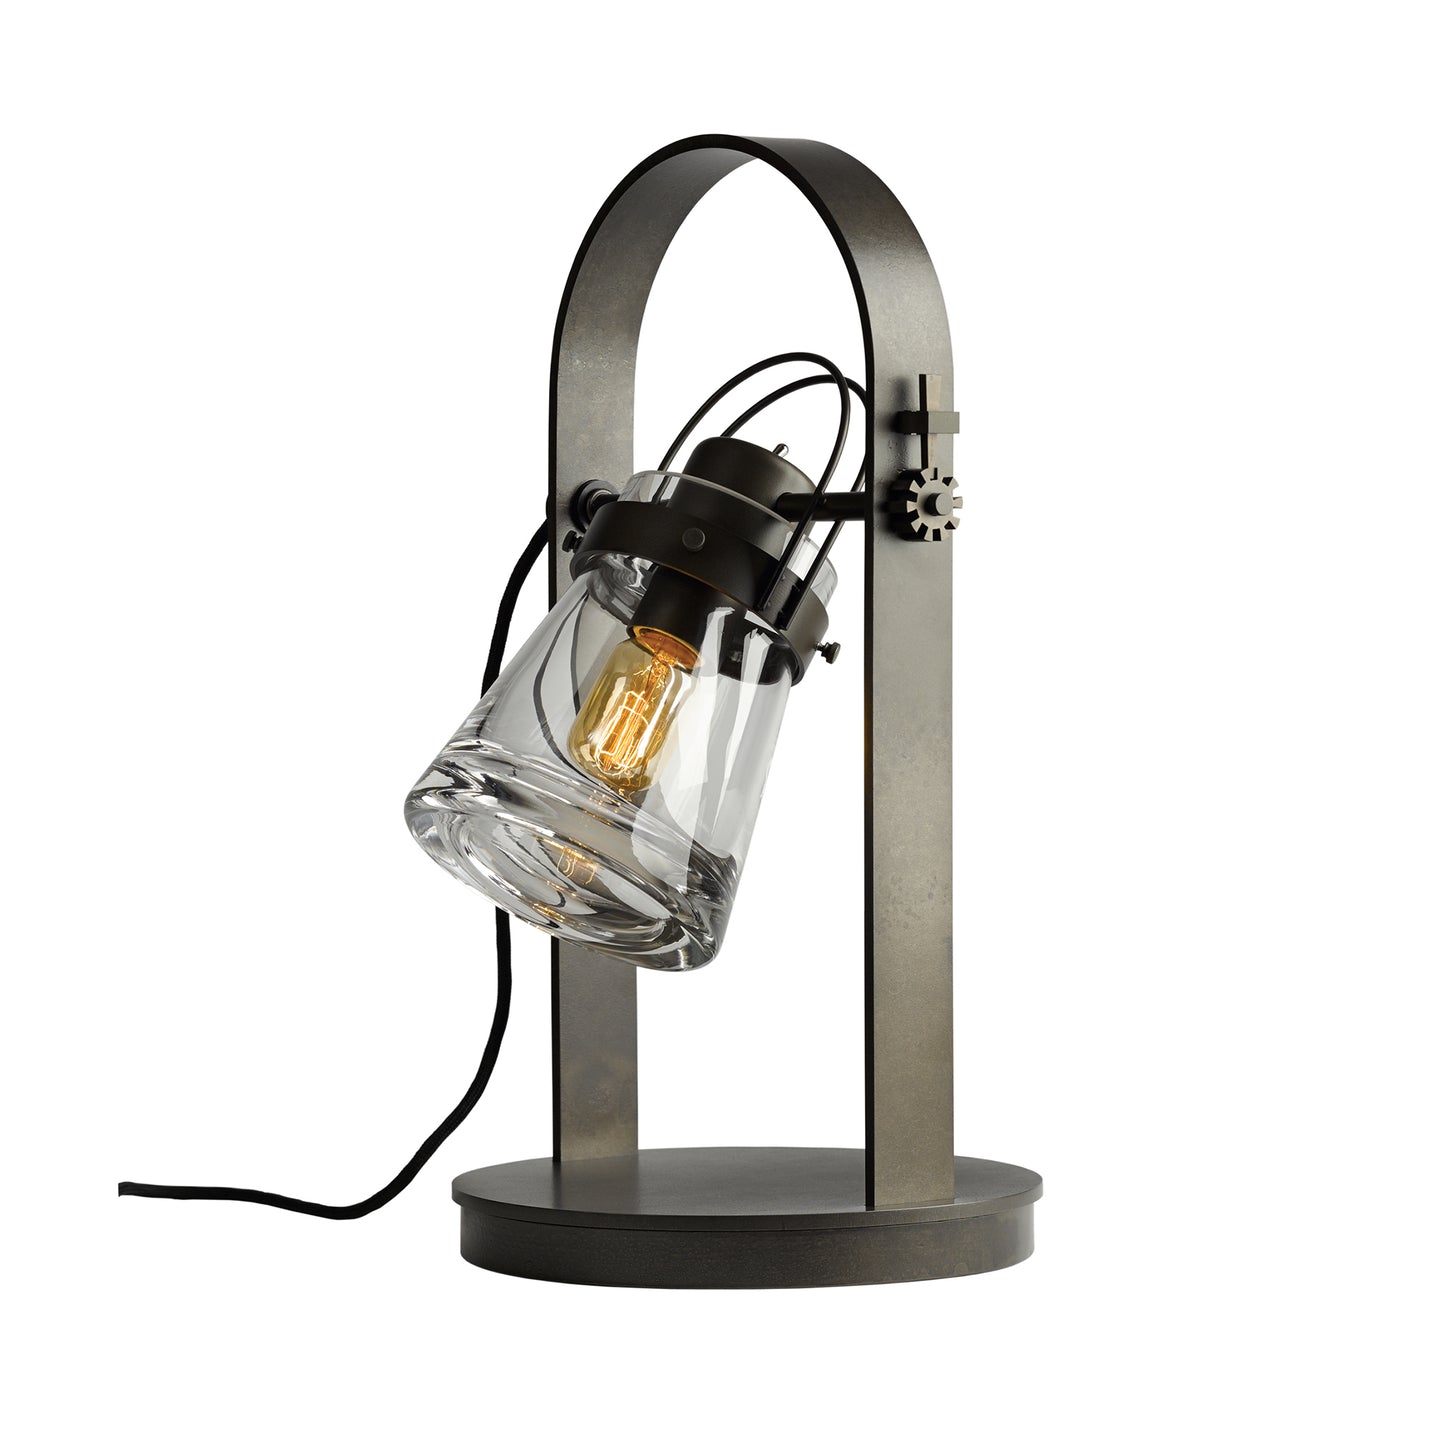 An Hubbardton Forge Erlenmeyer Table Lamp with a metal base and a glass shade.